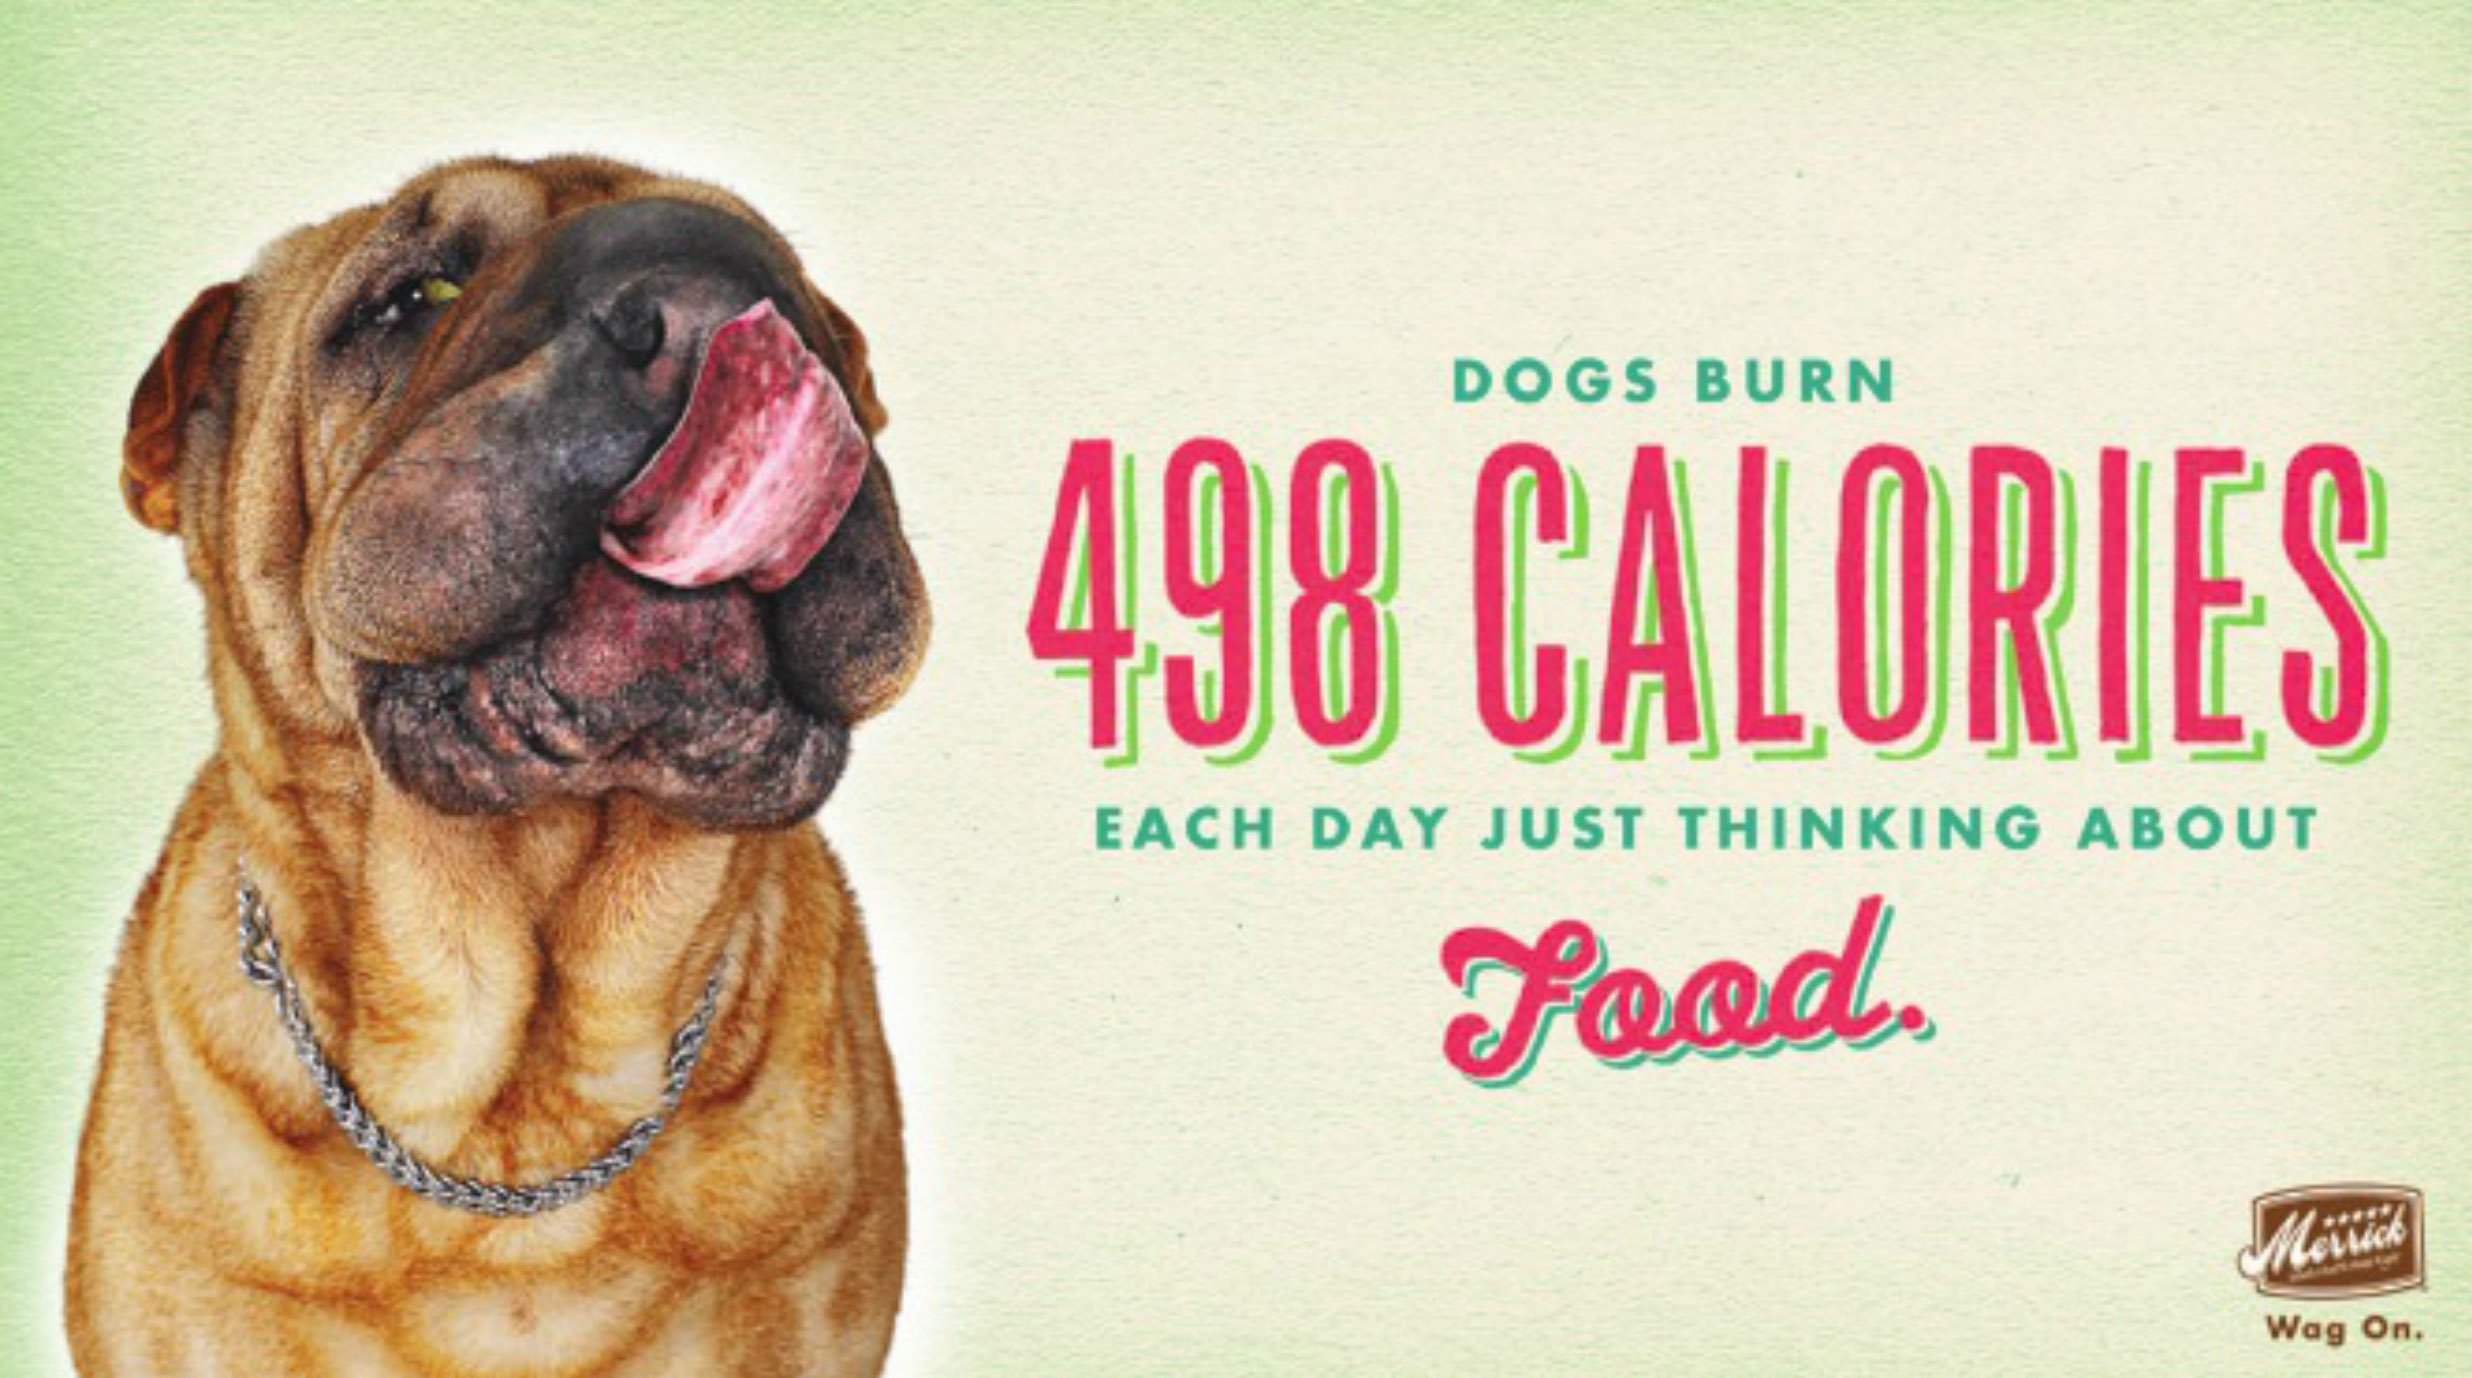 Dogs Burn 498 Calories Each Day Just Thinking about Food by Gandee Vasan Advertising Photographer